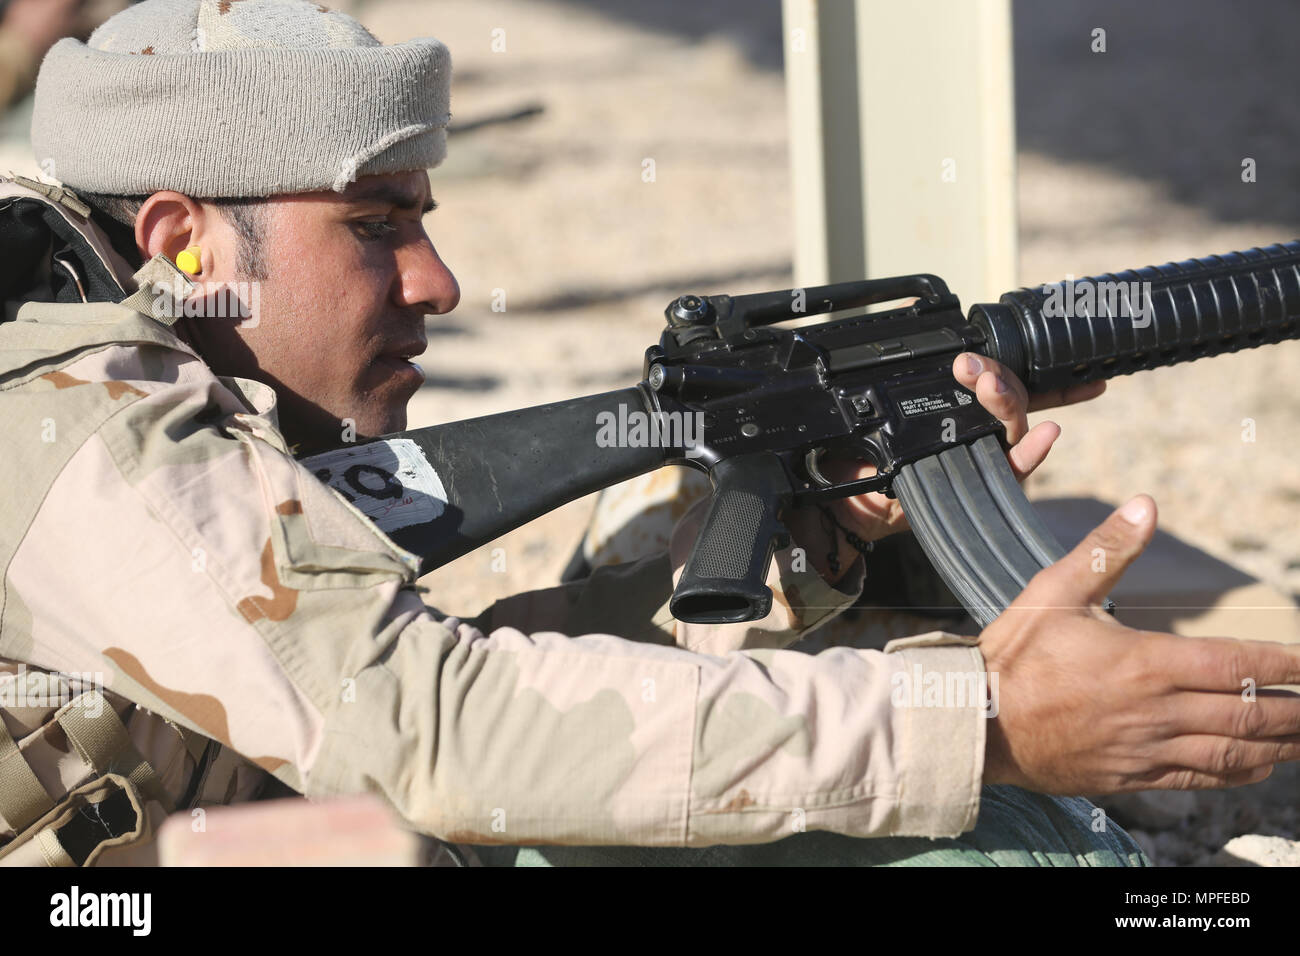 An Iraqi security forces soldier loads a magazine into his M16A2 rifle during weapons training at Al Asad Air Base, Iraq, Feb. 23, 2017.  This training is part of the overall Combined Joint Task Force – Operation Inherent Resolve building partner capacity mission to train and improve the capability of partnered forces fighting ISIS. CJTF-OIR is the global Coalition to defeat ISIS in Iraq and Syria. (U.S. Army photo by Sgt. Lisa Soy) Stock Photo